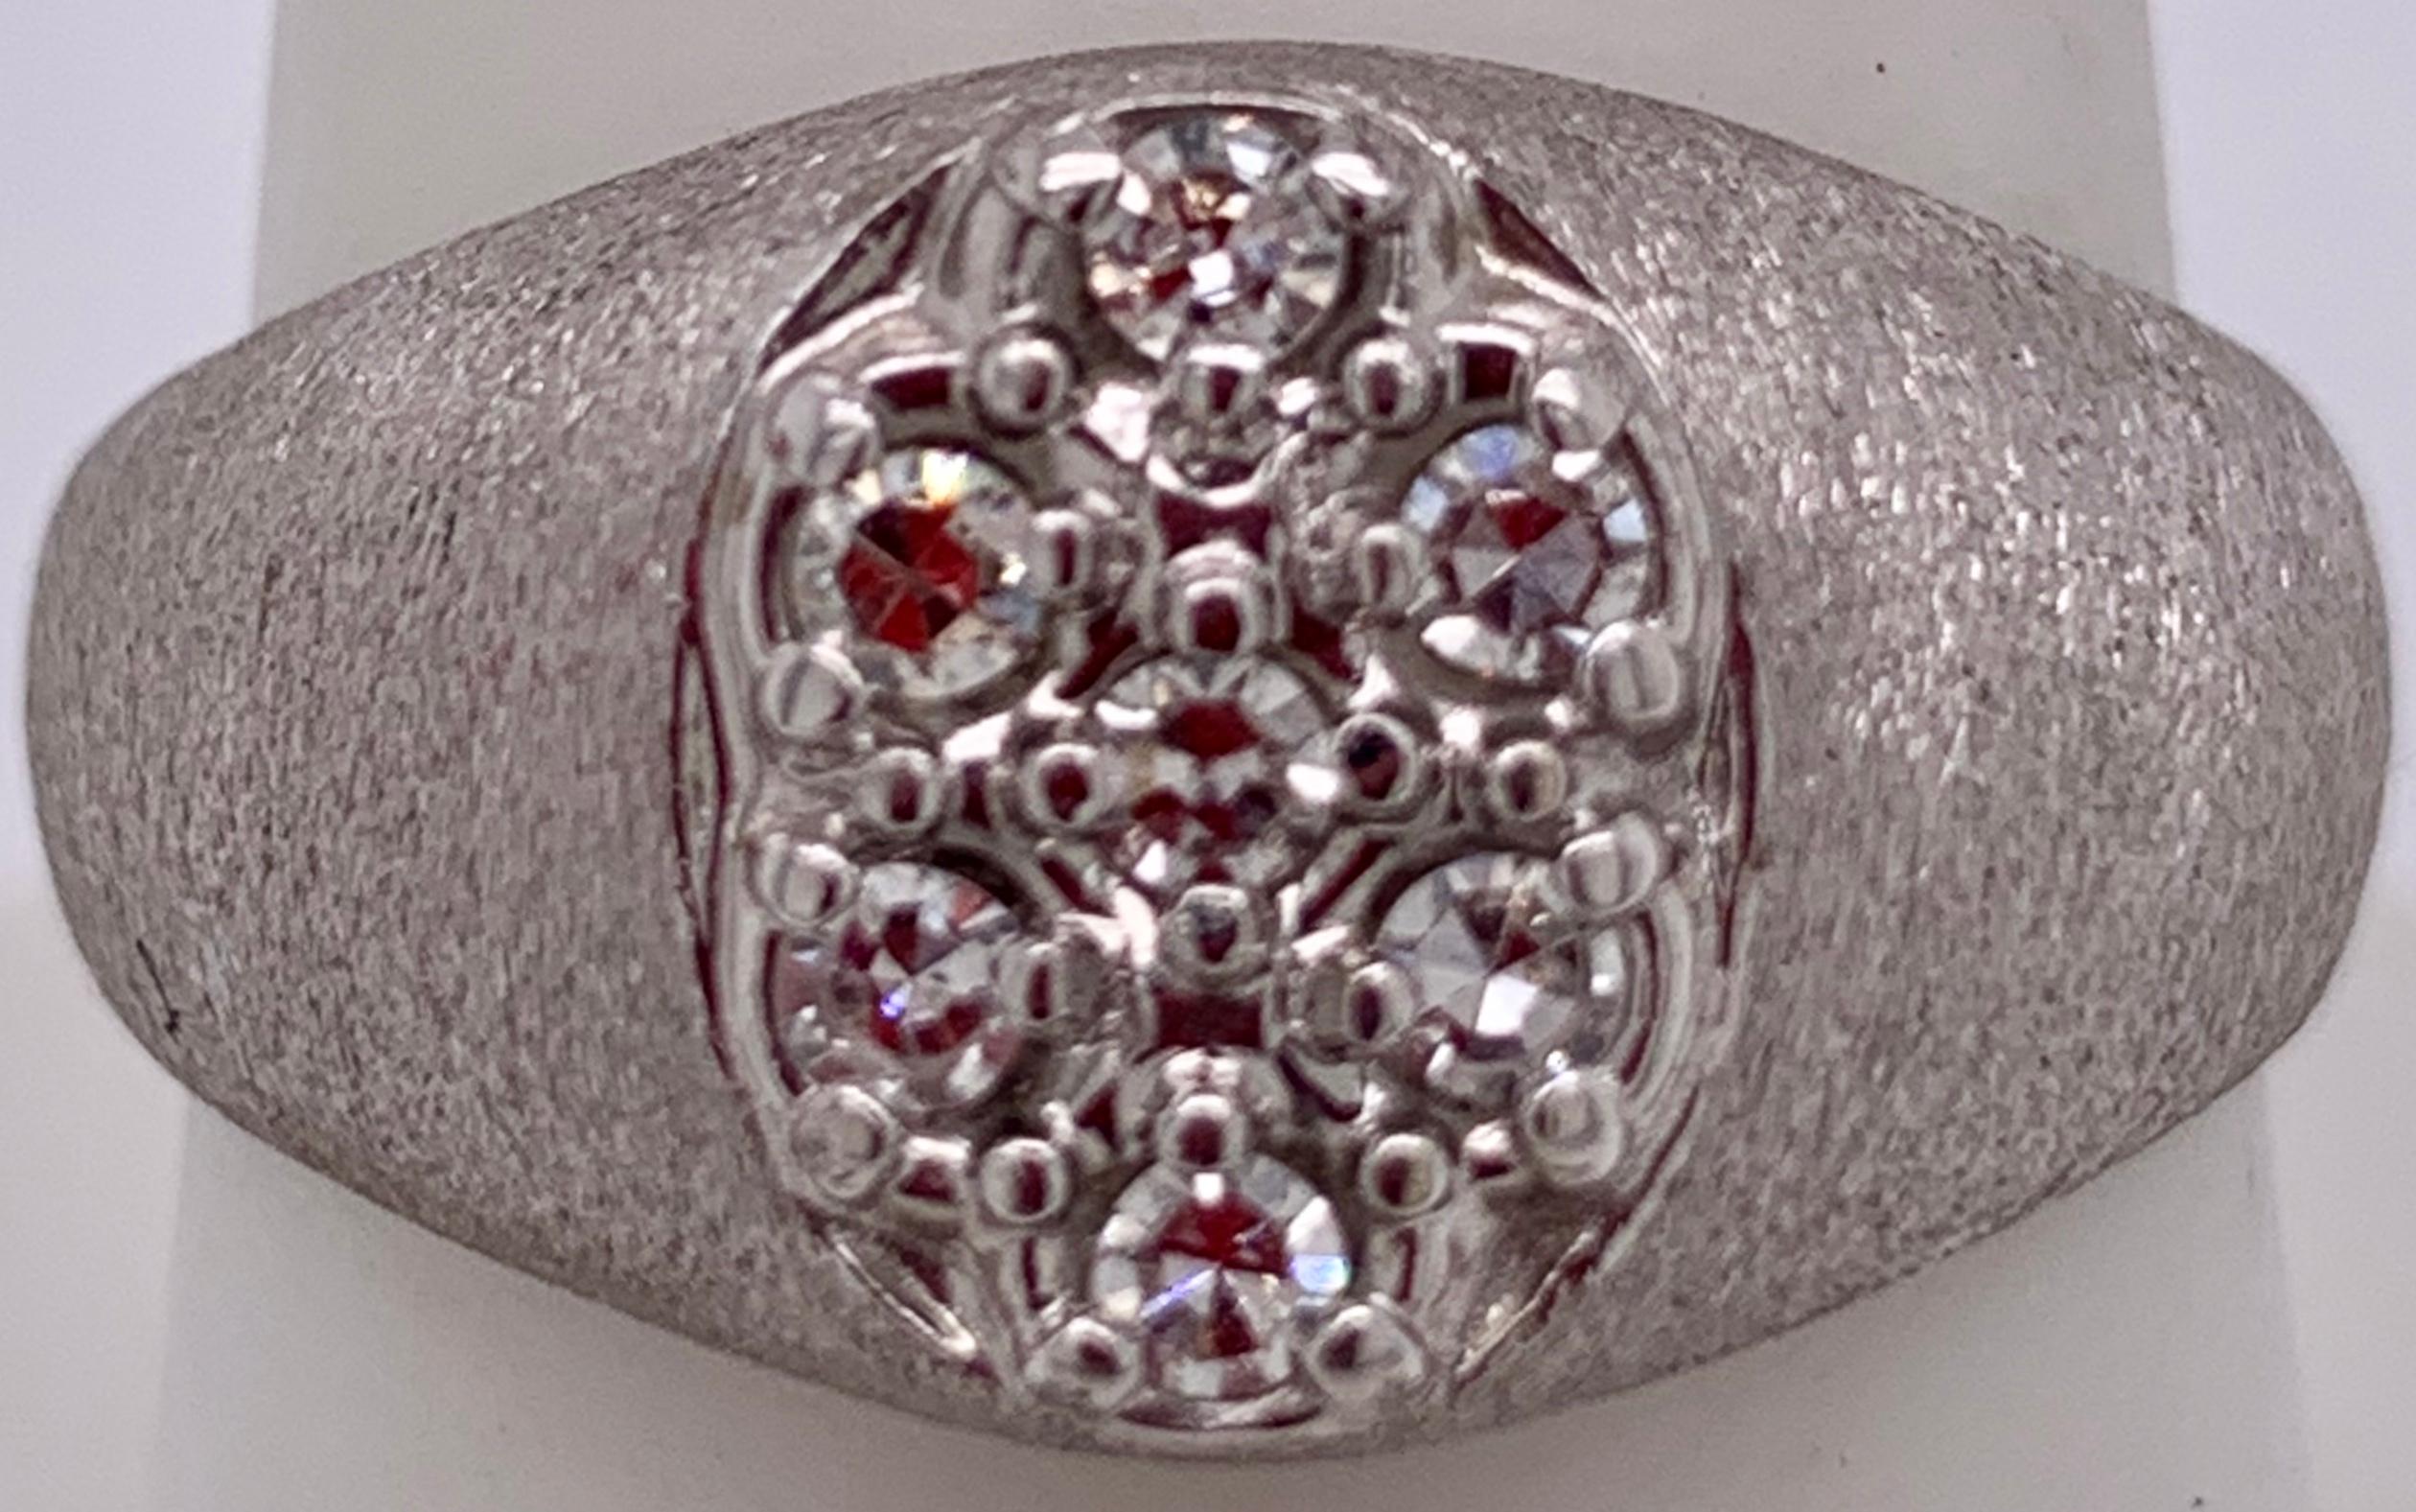 14Kt White Gold Brushed Finish With Diamond Cluster Fashion Ring.
Size 7.34.  
1.50 Total diamond weight.  
12.21 gram total weight.